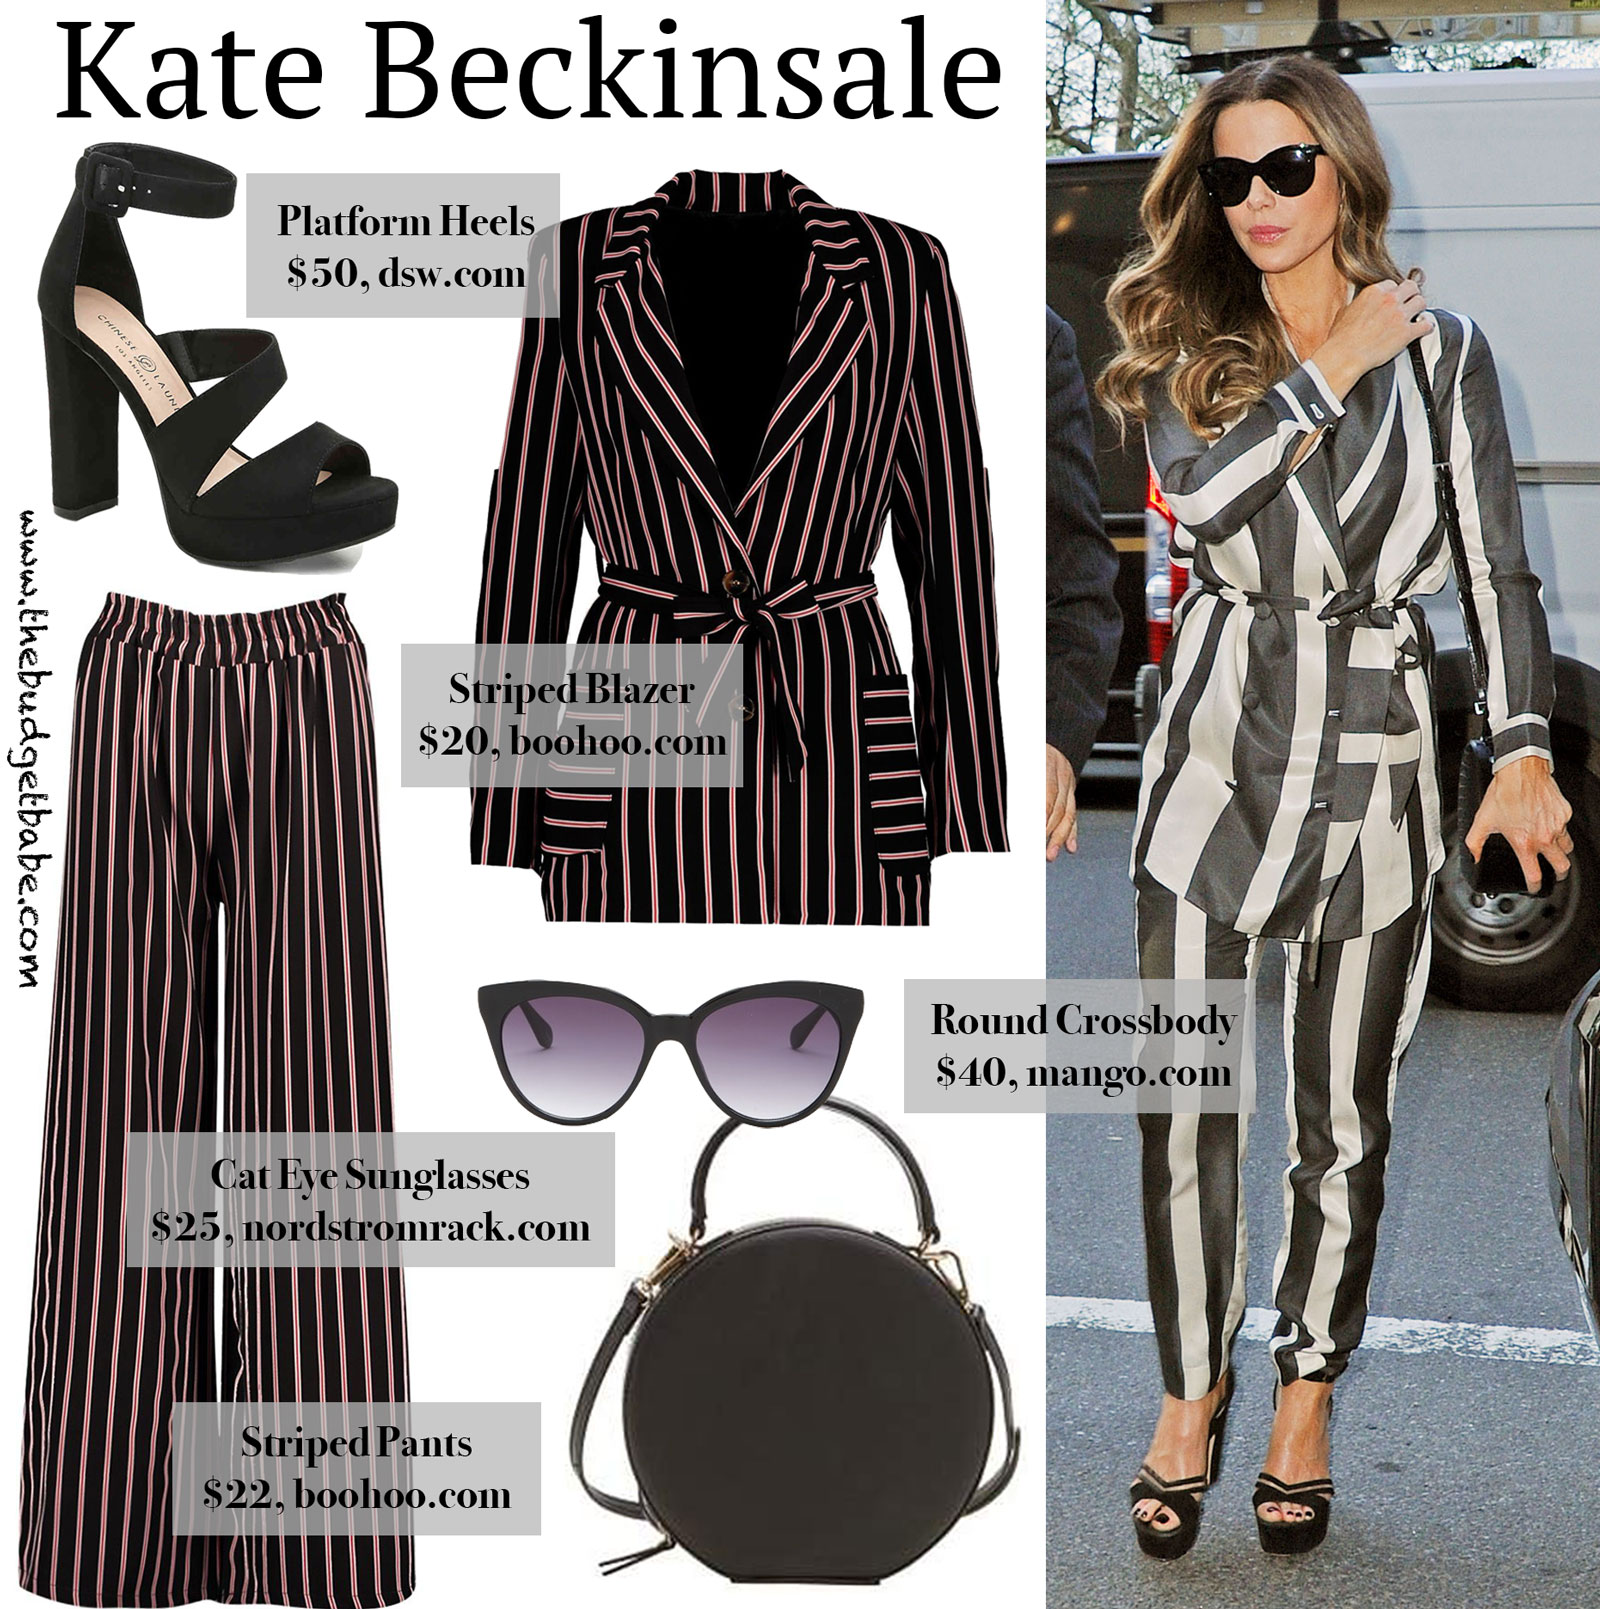 Kate Beckinsale Striped Pants and Blazer Look for Less